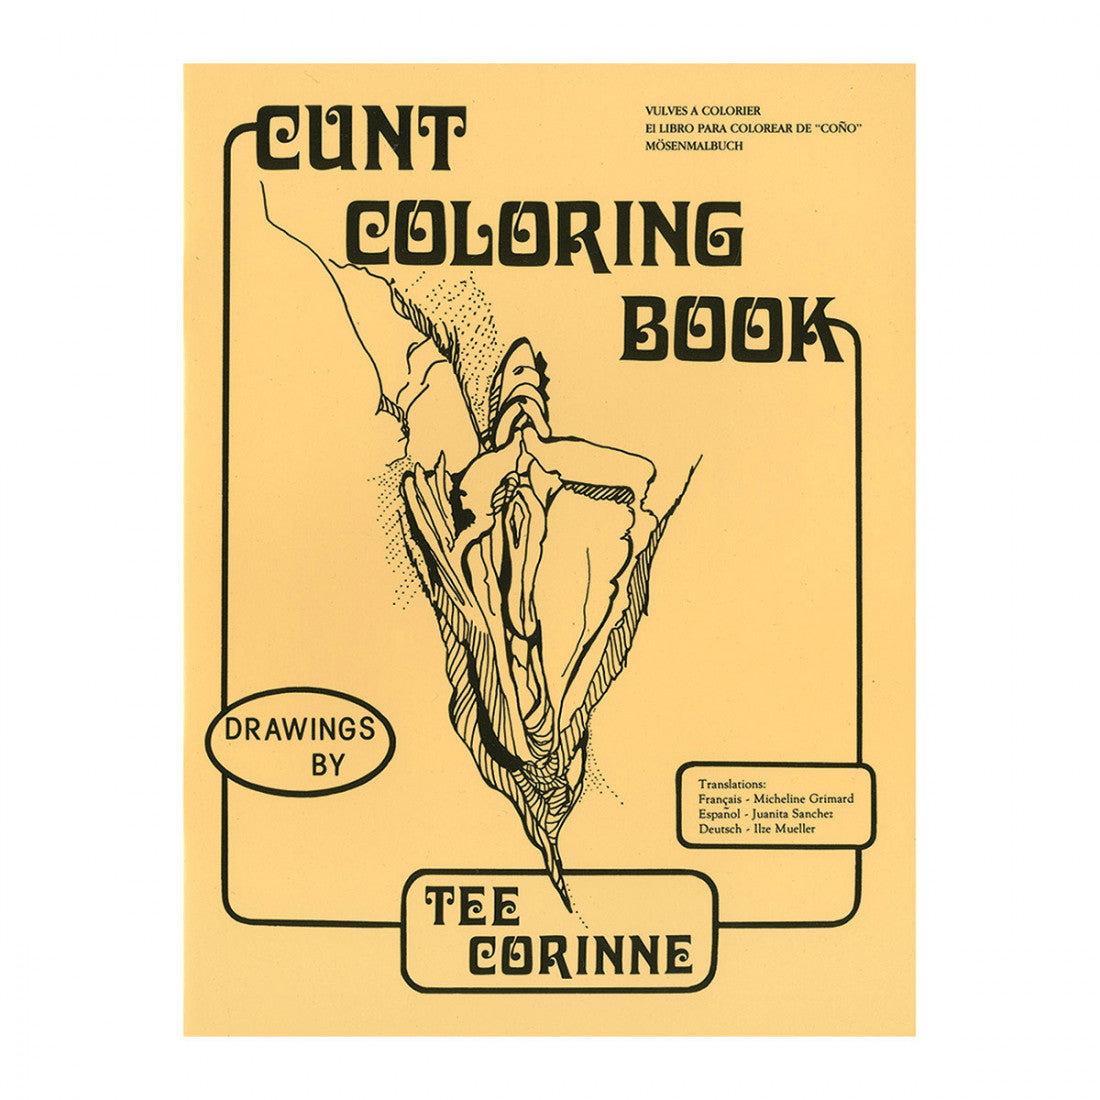 The BIG Coloring Book of Vaginas – out of stock